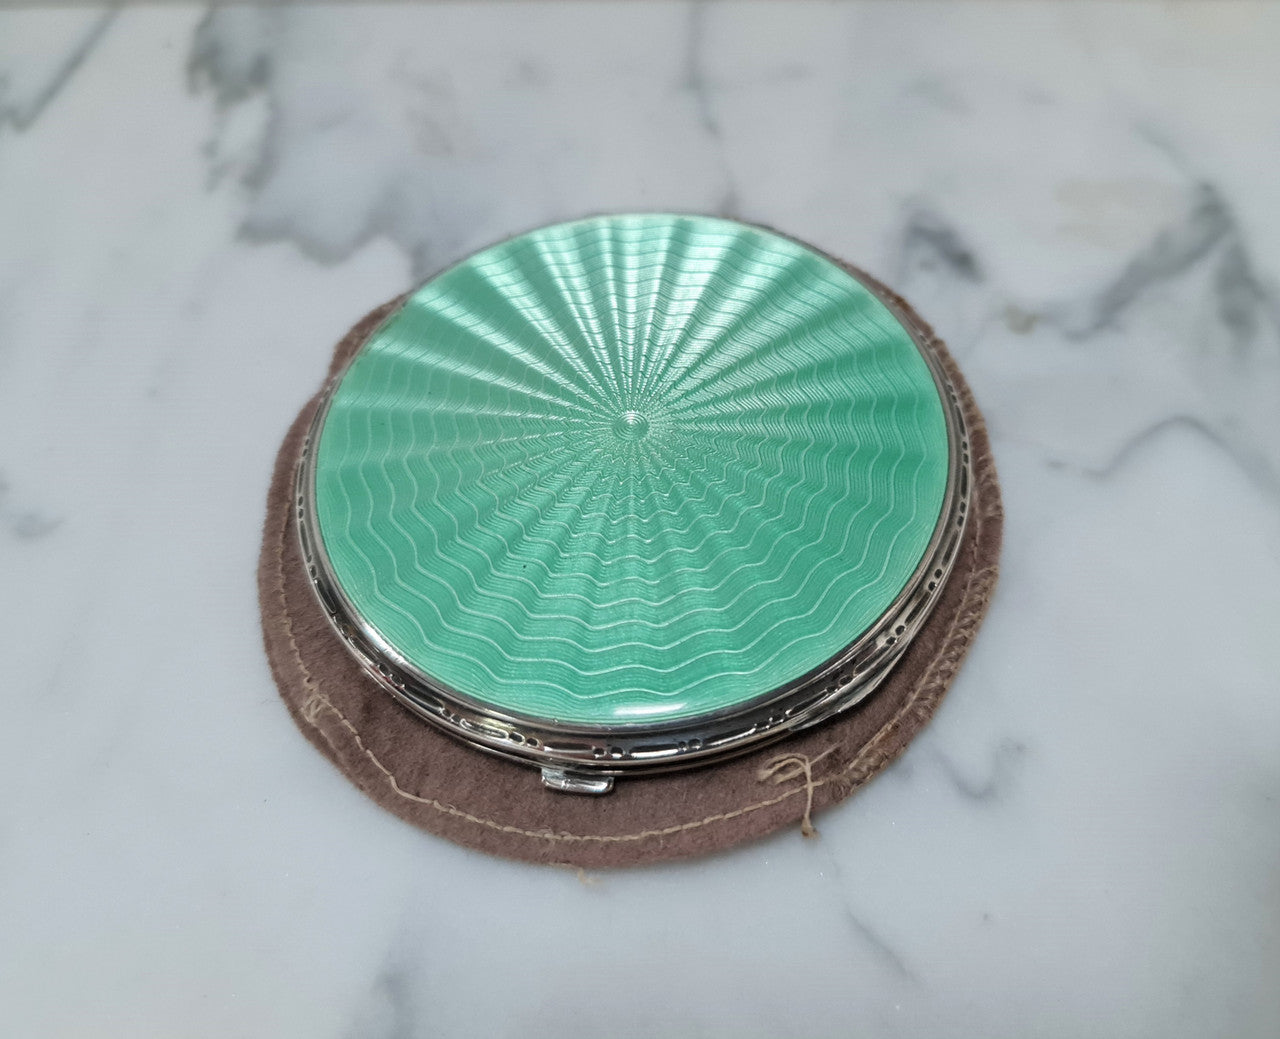 This beautiful sterling silver compact with interior mirror has a stunning mint green guilloche top in very good condition . It is marked "Birmingham 1937".